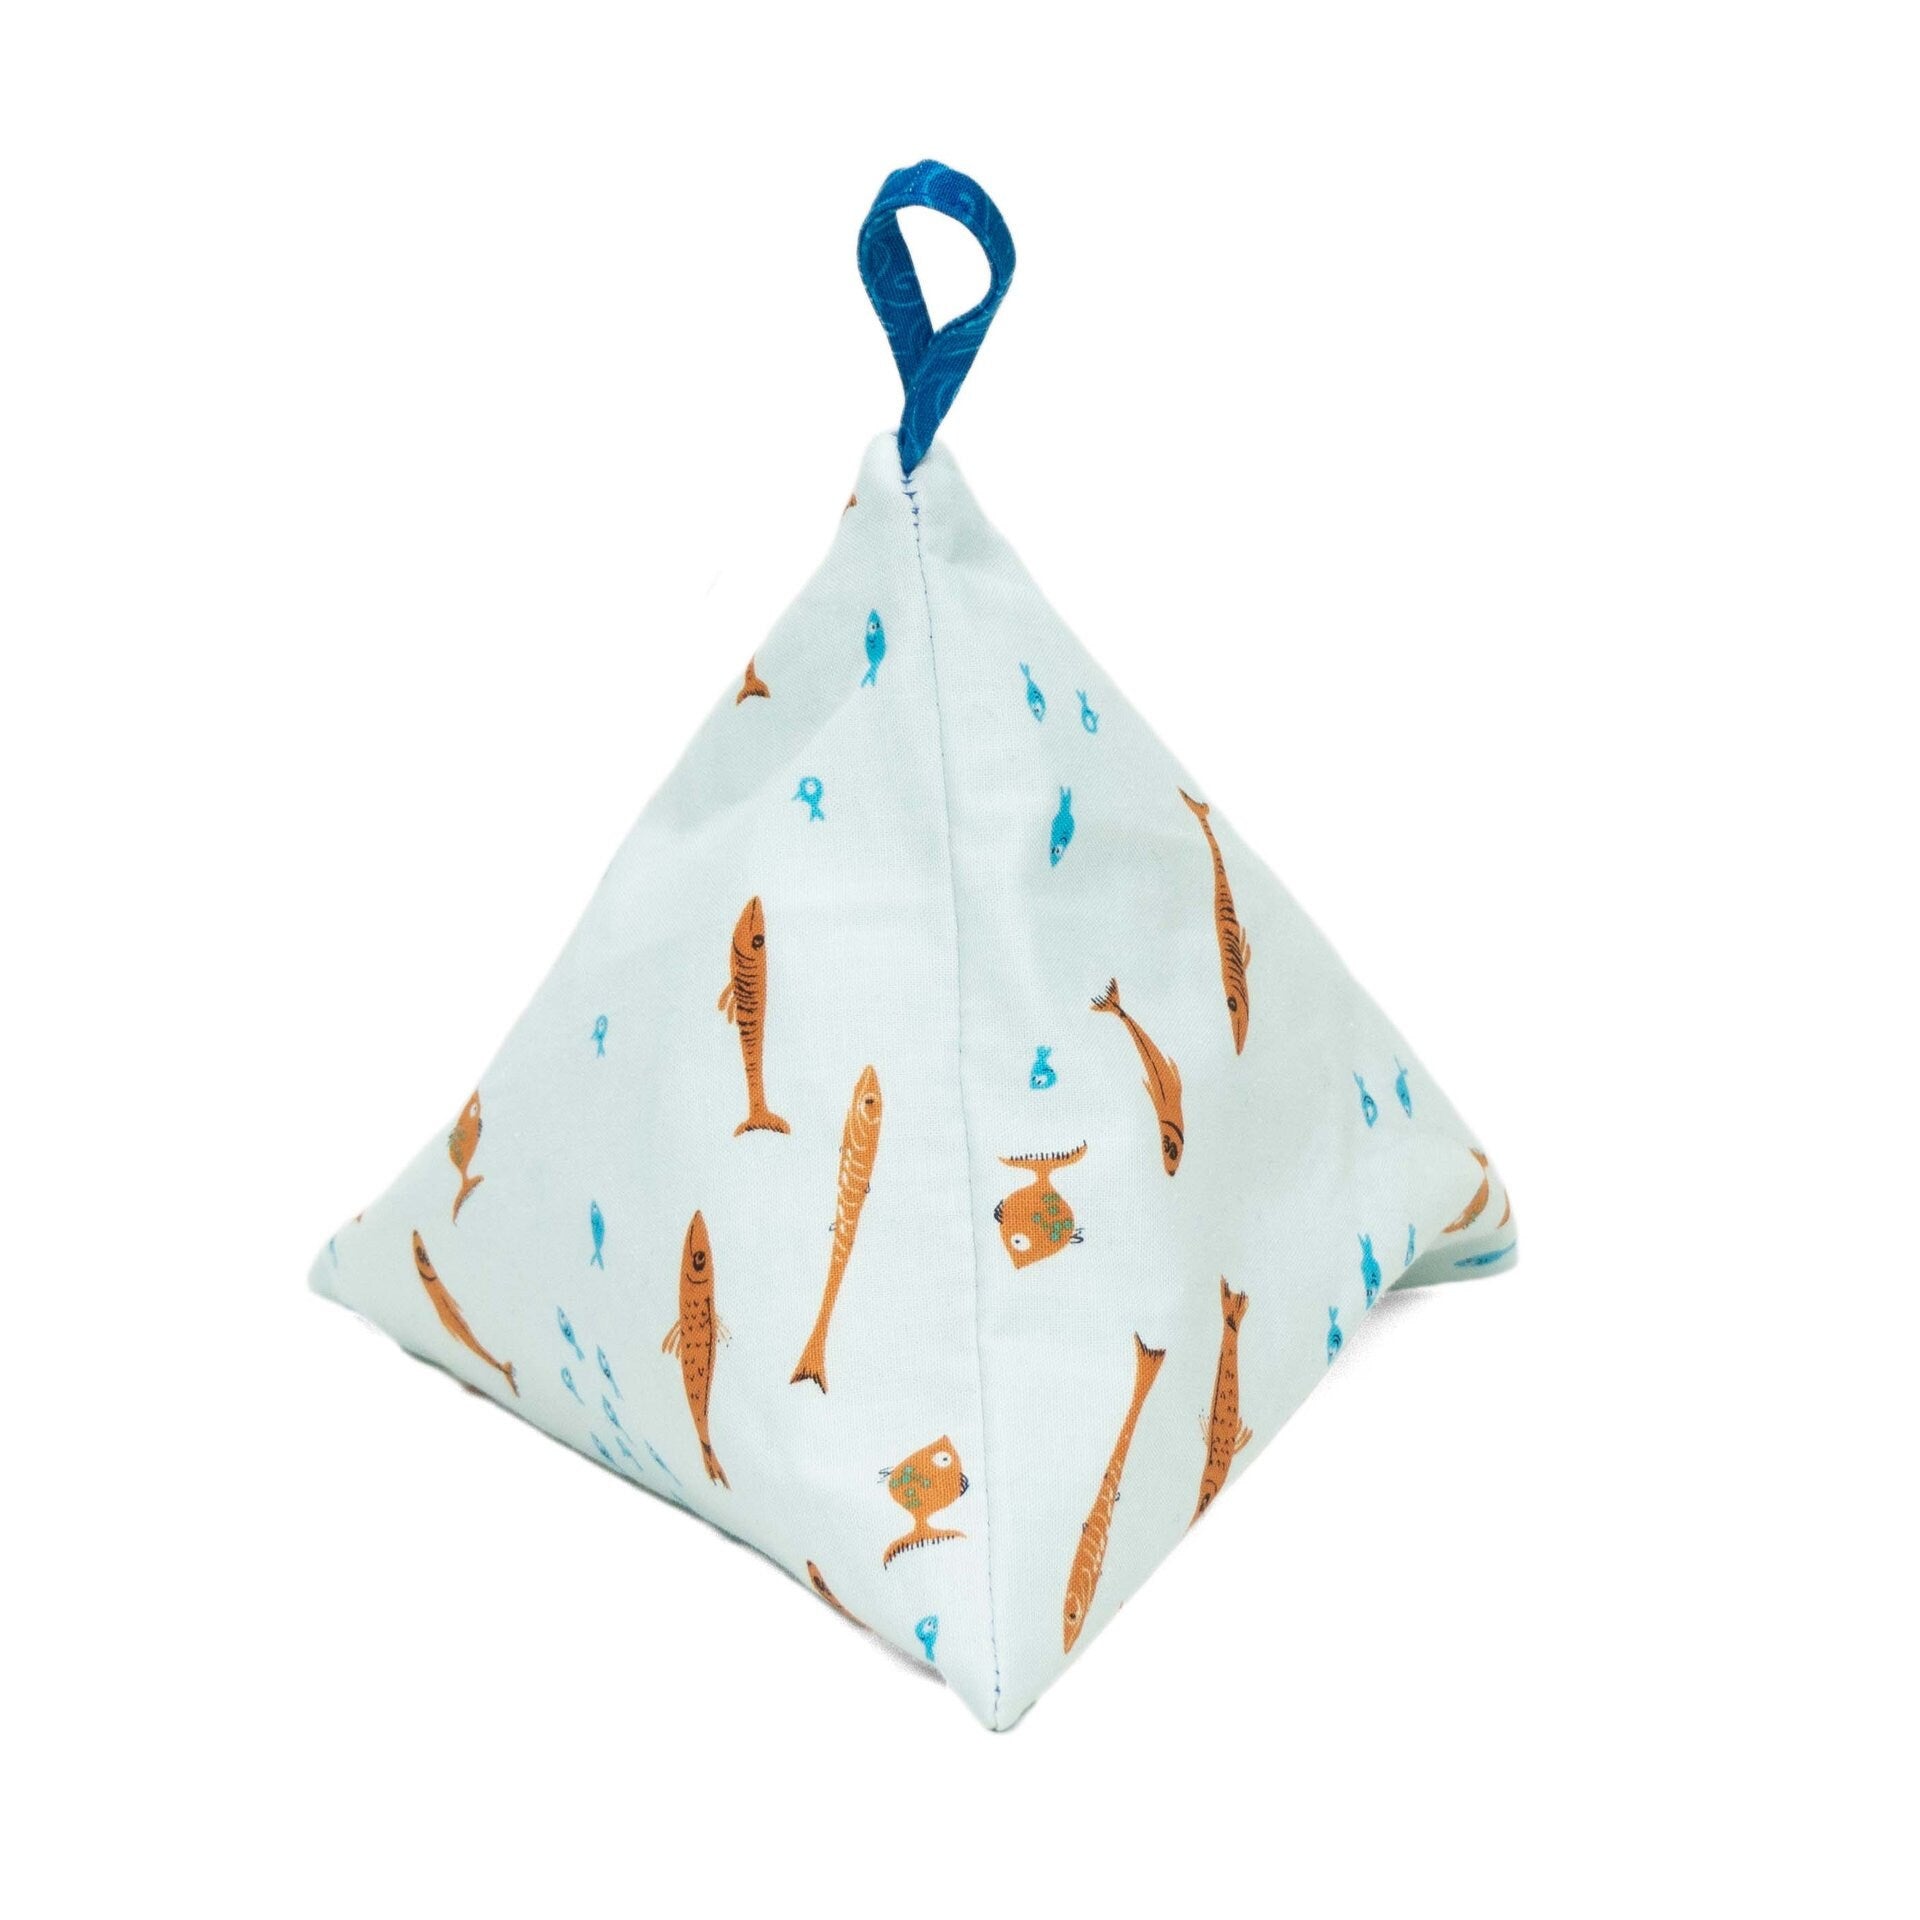 Fishies - Llexical Notions Pouch - Knitting, Crochet, Spinning Accessory Bag